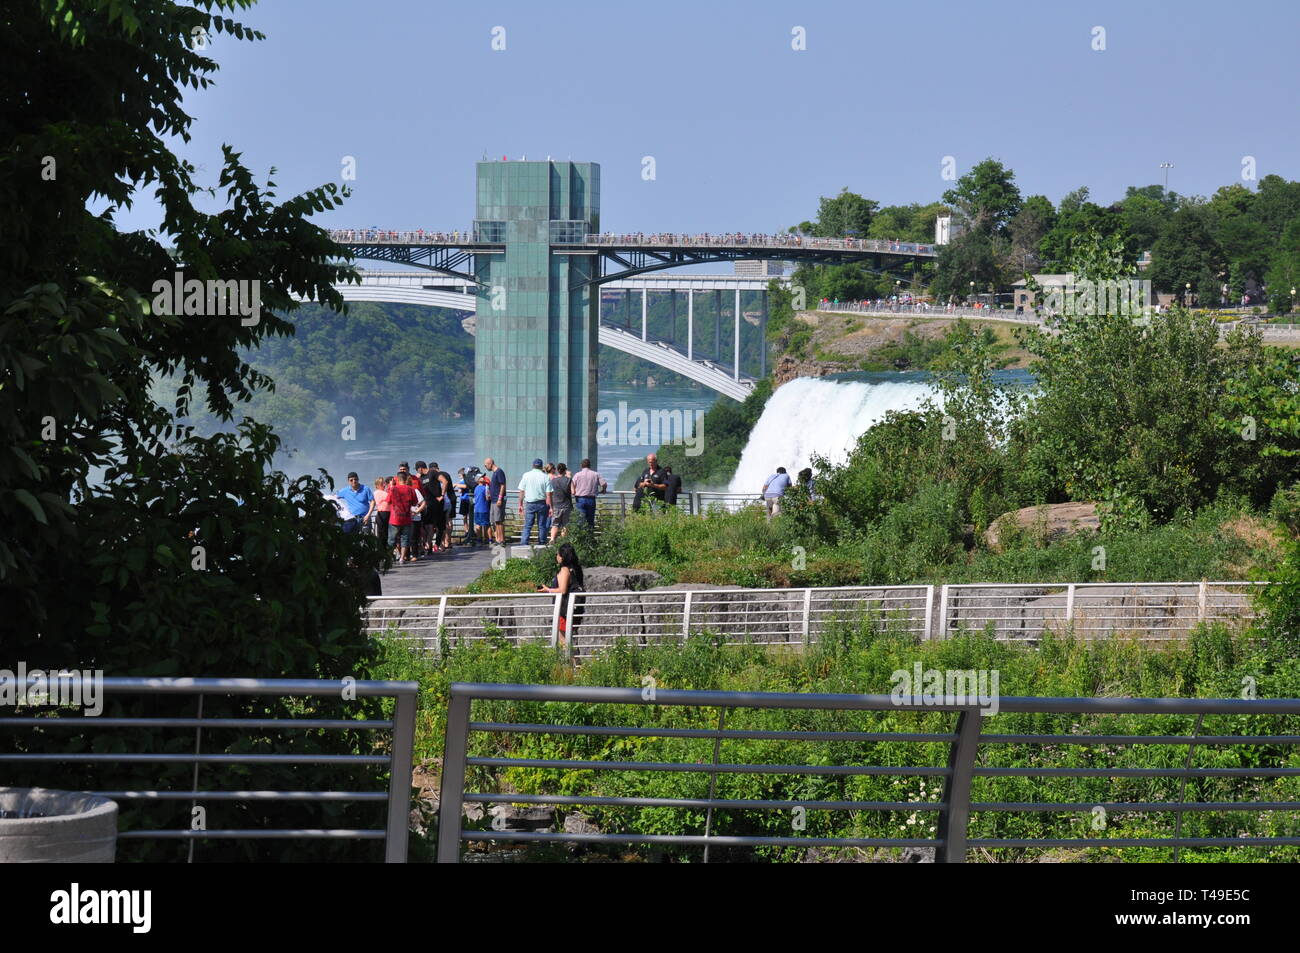 A view of Tourists at the top of the American Falls with the Rainbow Bridge and Observation tower in the background at Niagara Falls, United States Stock Photo